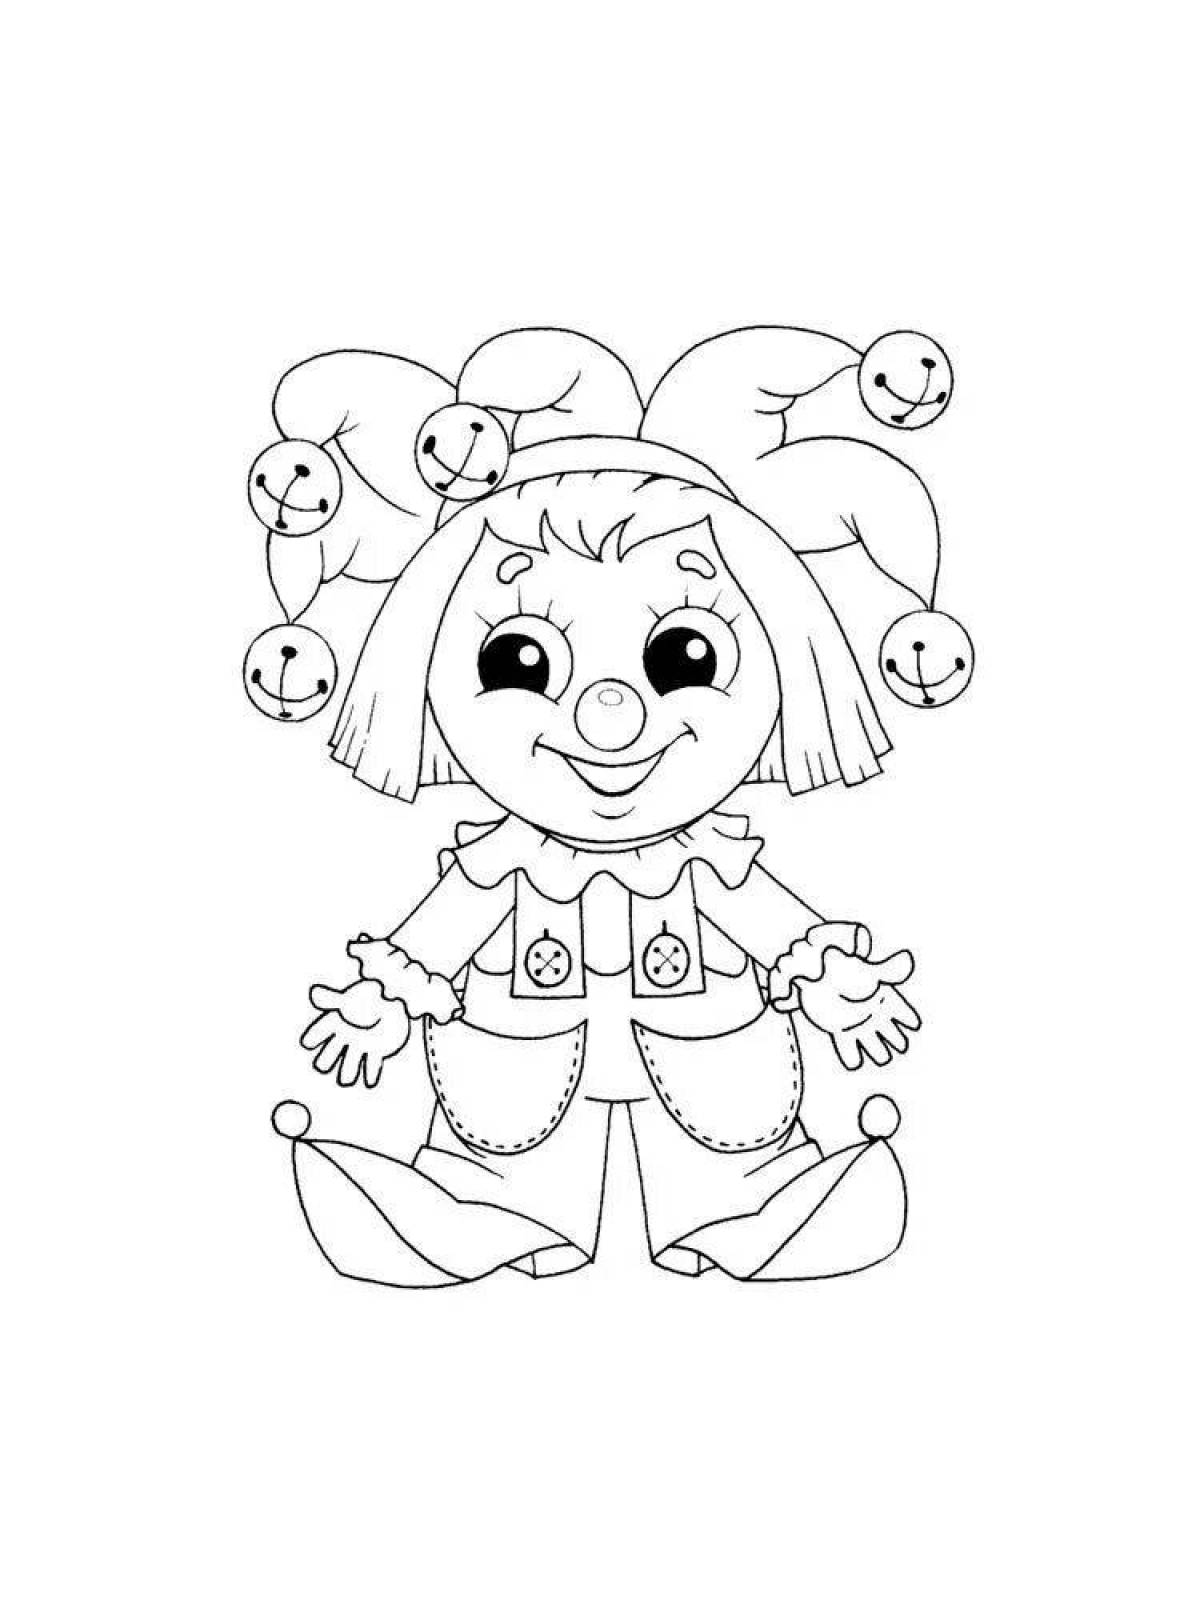 Outstanding youth parsley coloring page